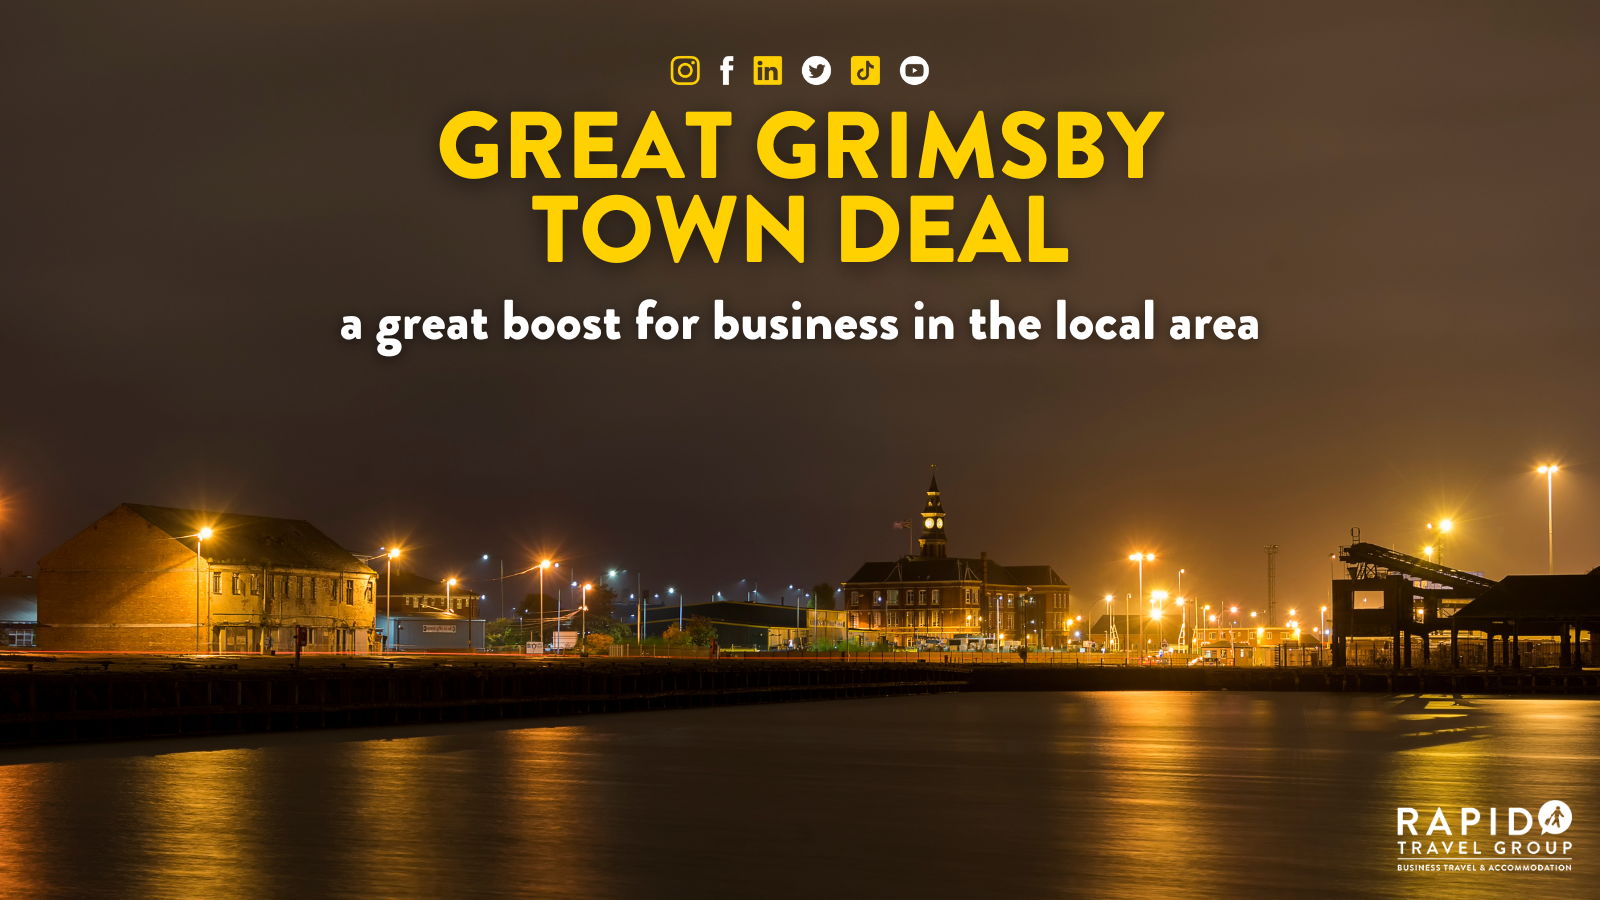 Great Grimsby Town Deal: a great boost for business in the local area